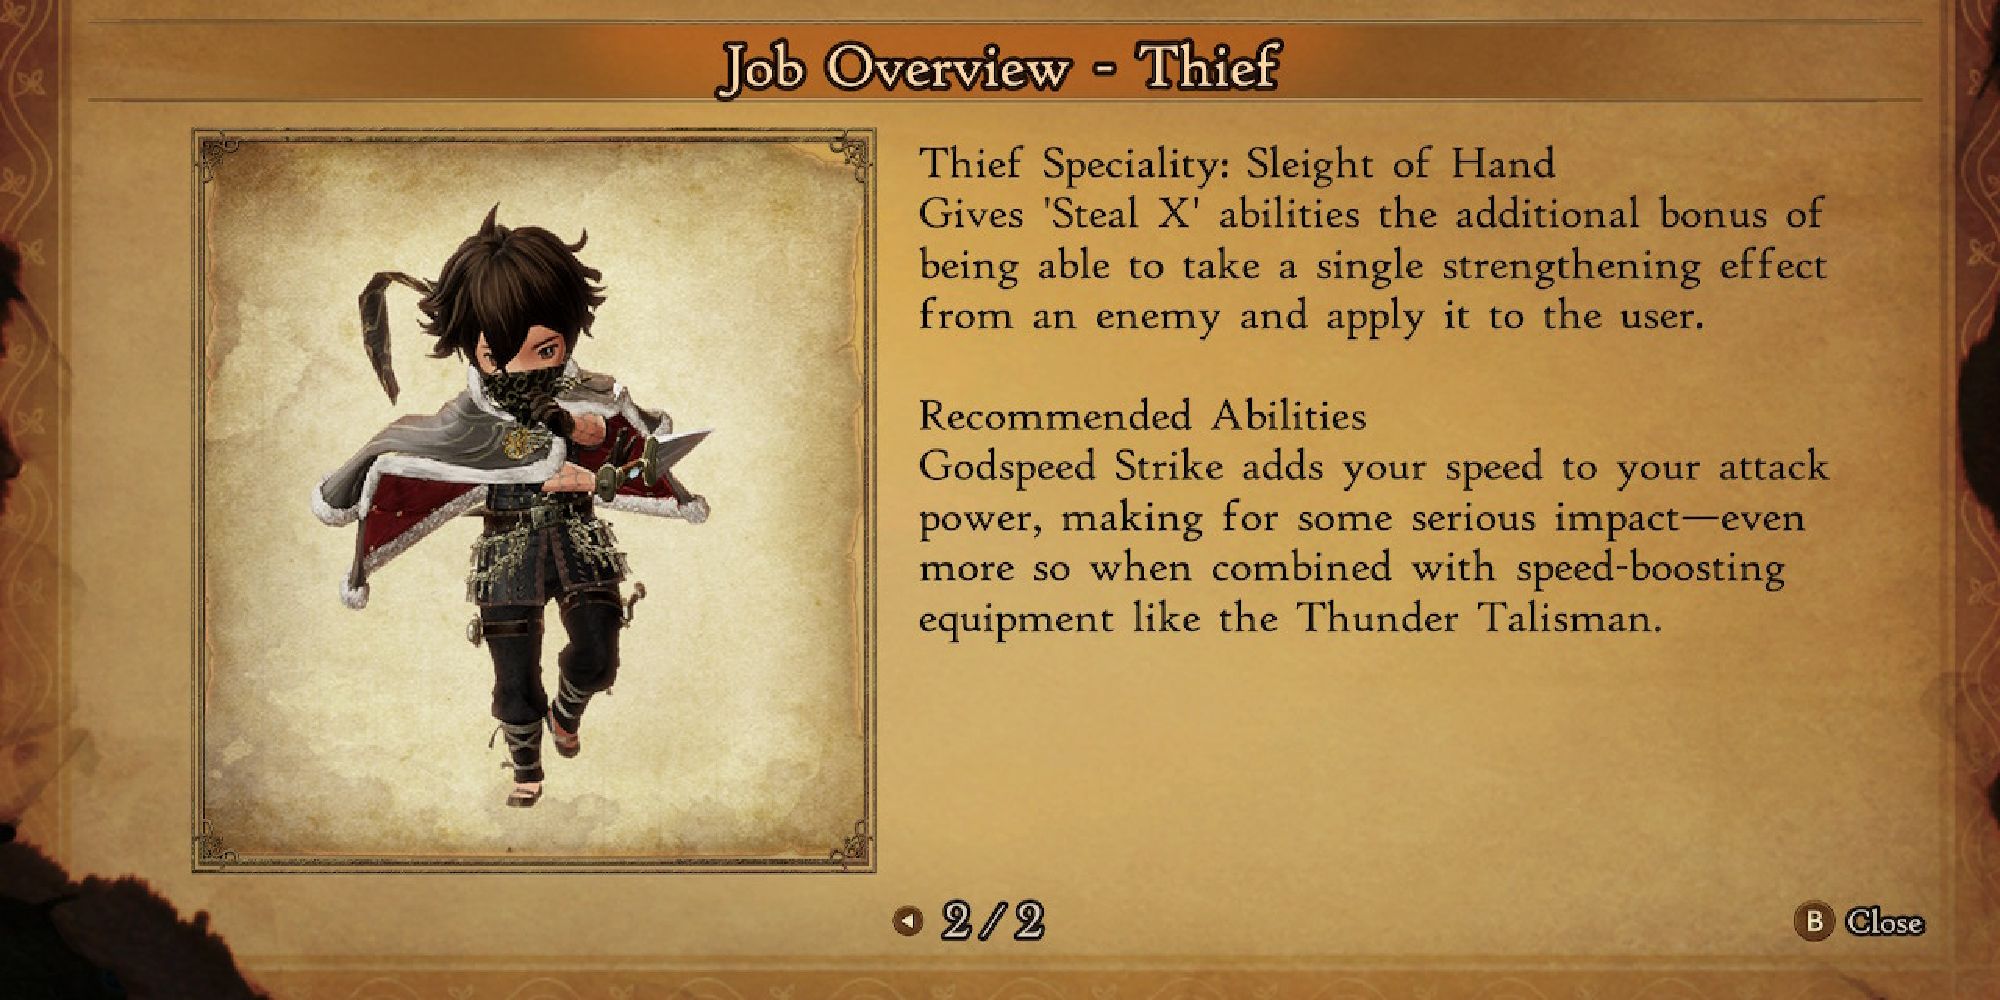 thief description with info about godspeed strike